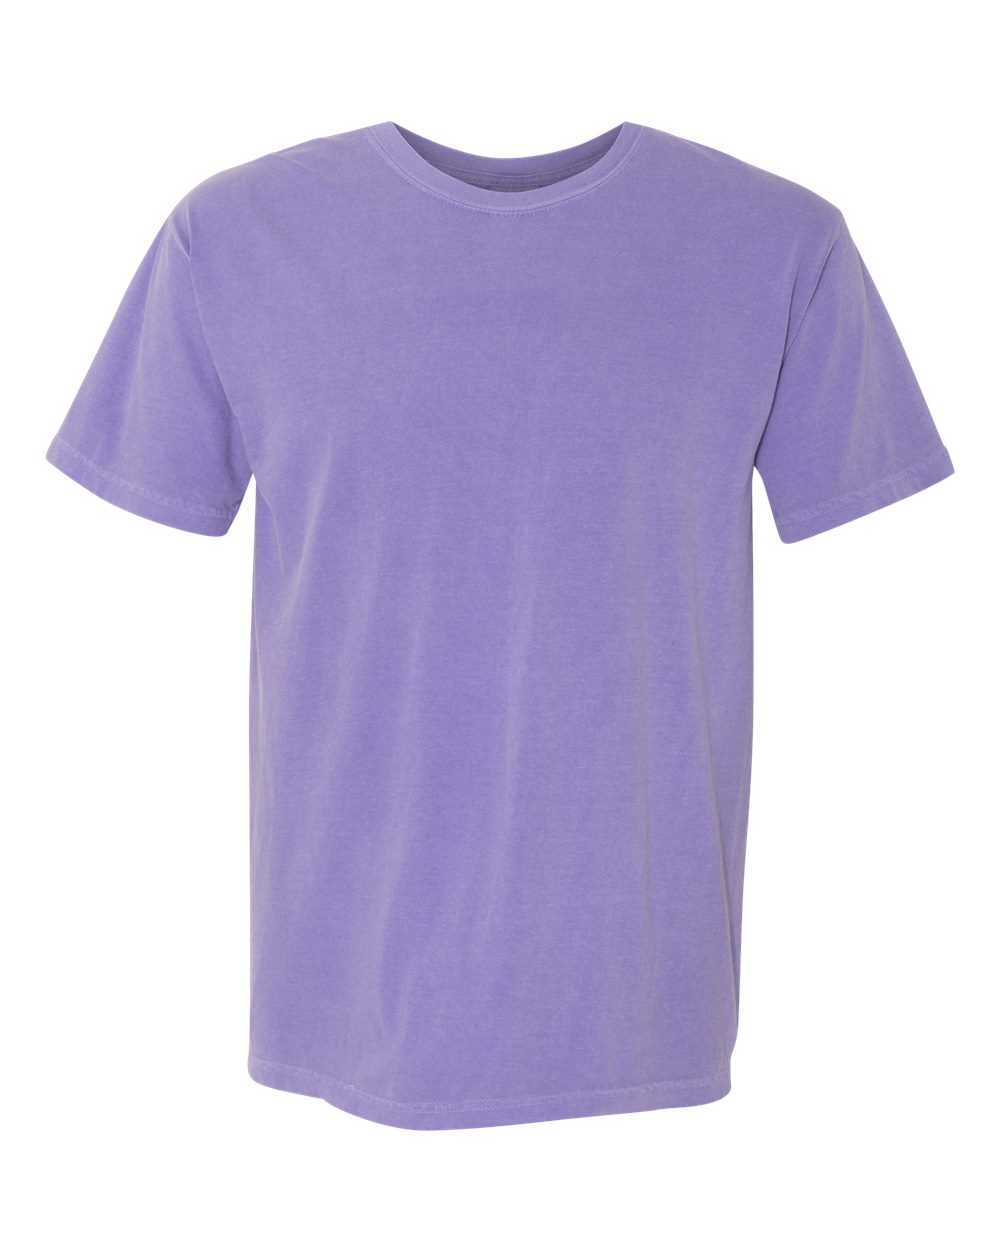 Comfort Colors Garment-Dyed Tee (1717) in Violet